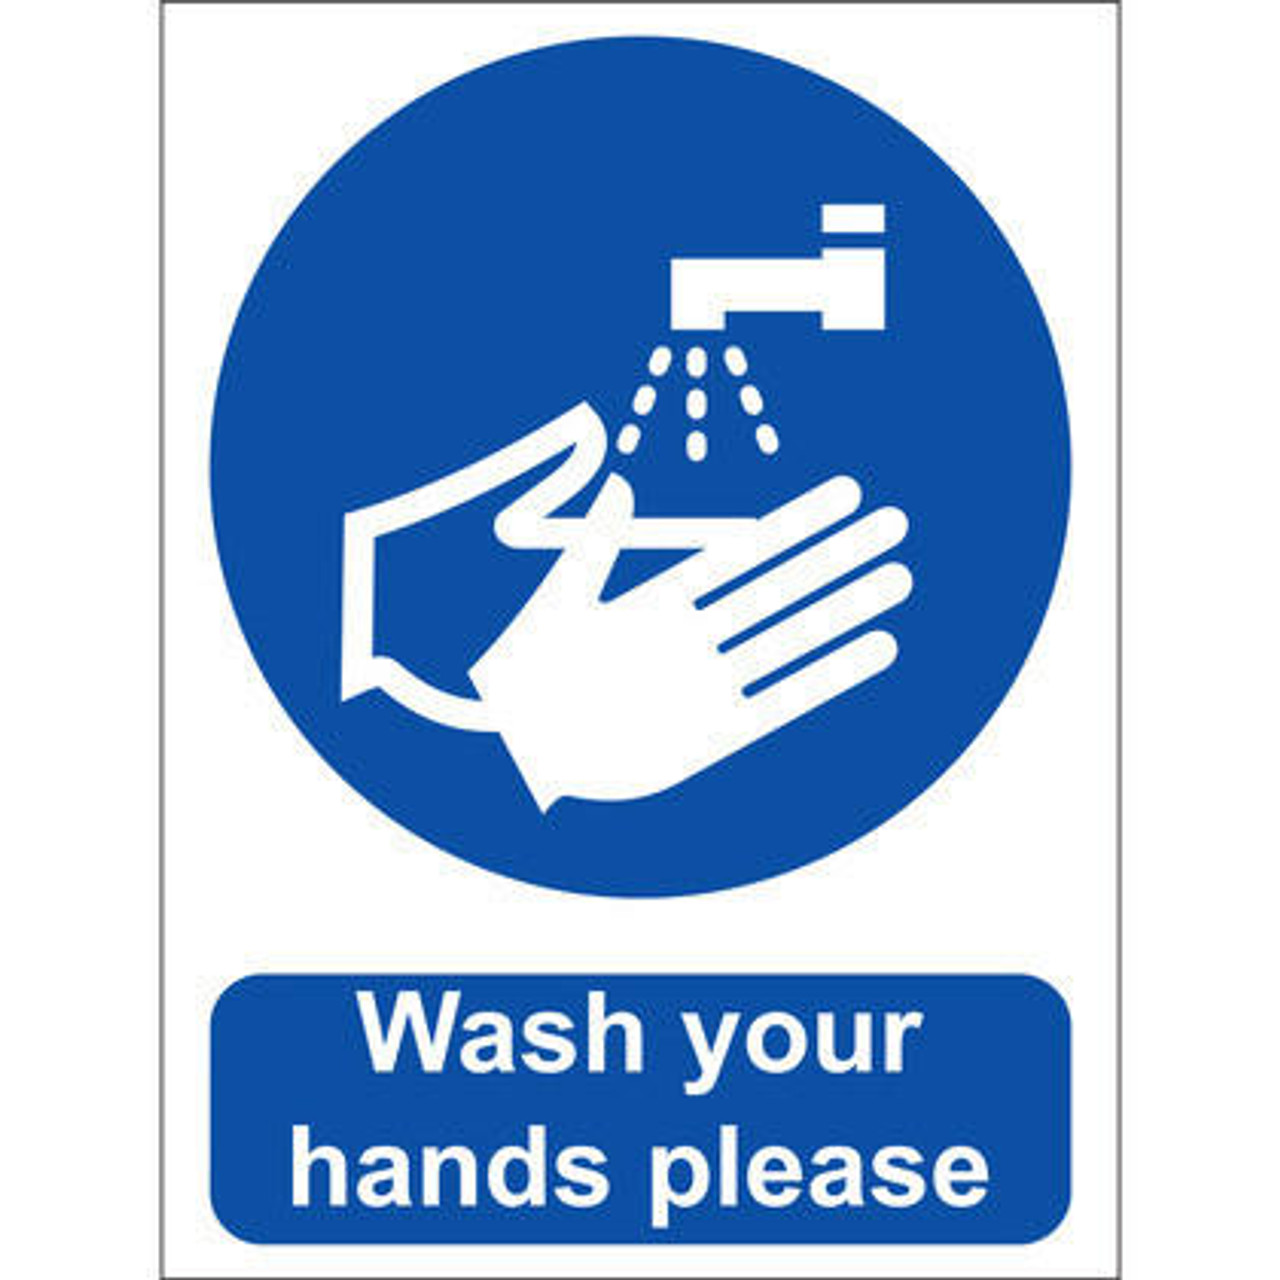 Zafety Wash your Hands Please Vinyl Sign 15x20cm